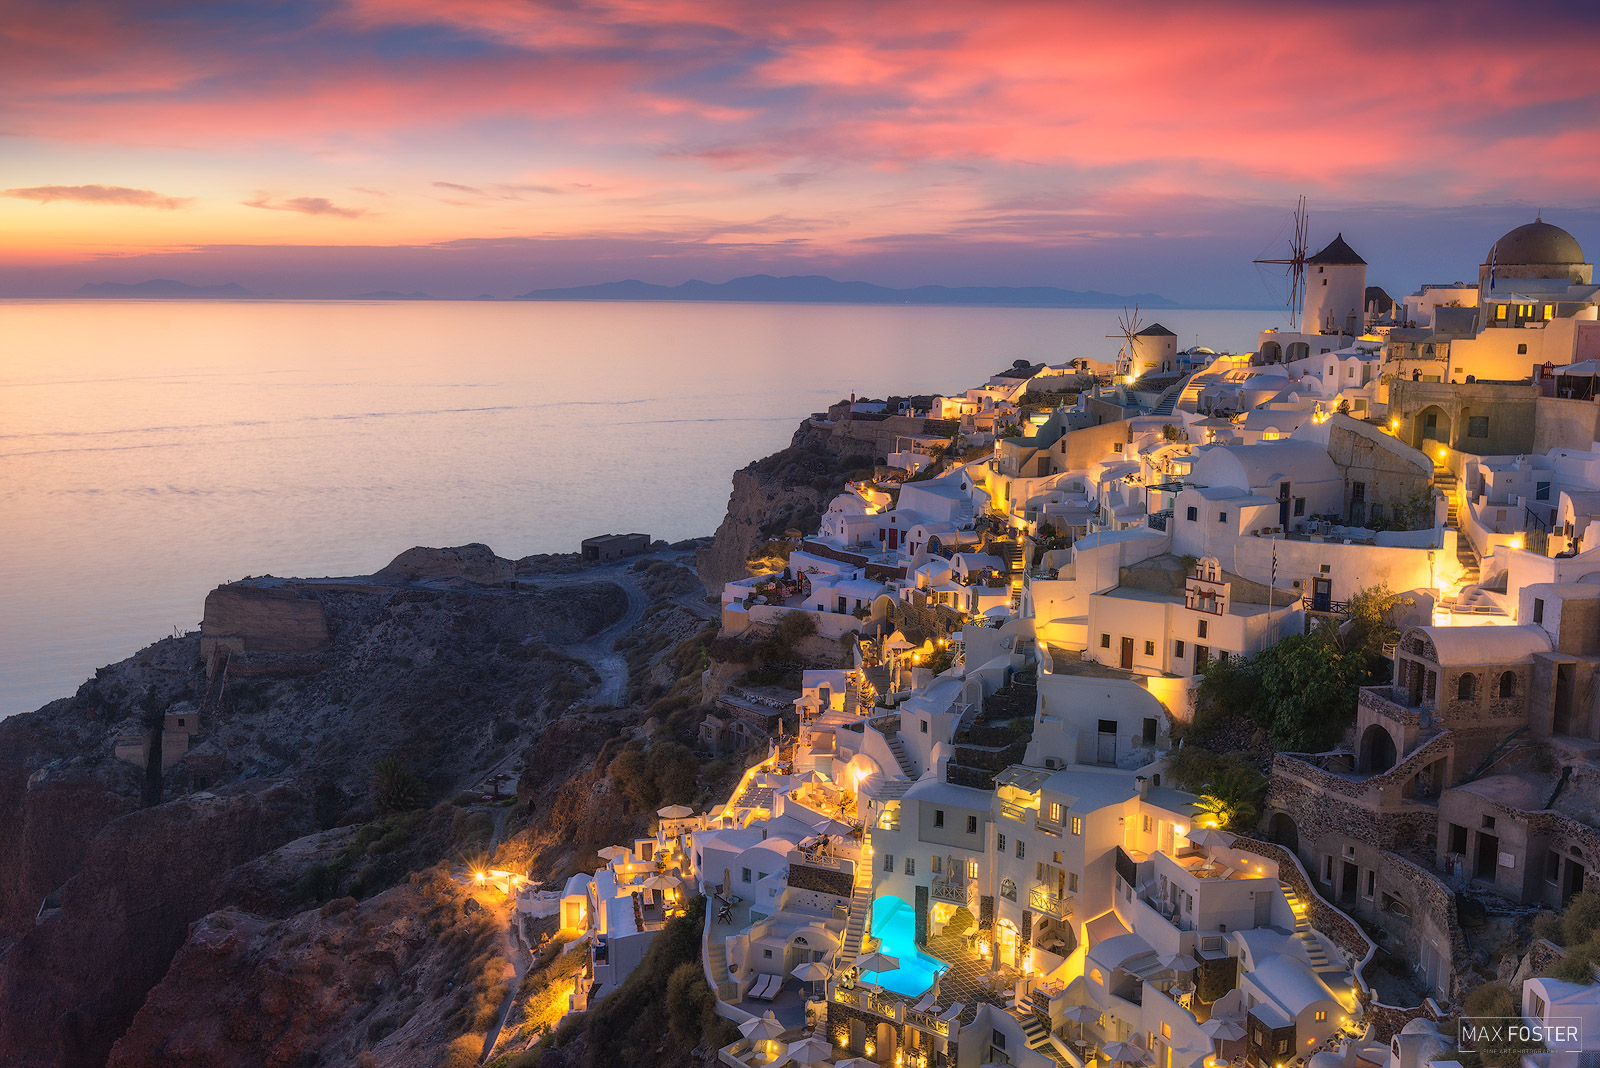 Breath new life into your home with Evanescence, Max Foster's limited edition photography print of Oia, Santorini from his Travel...